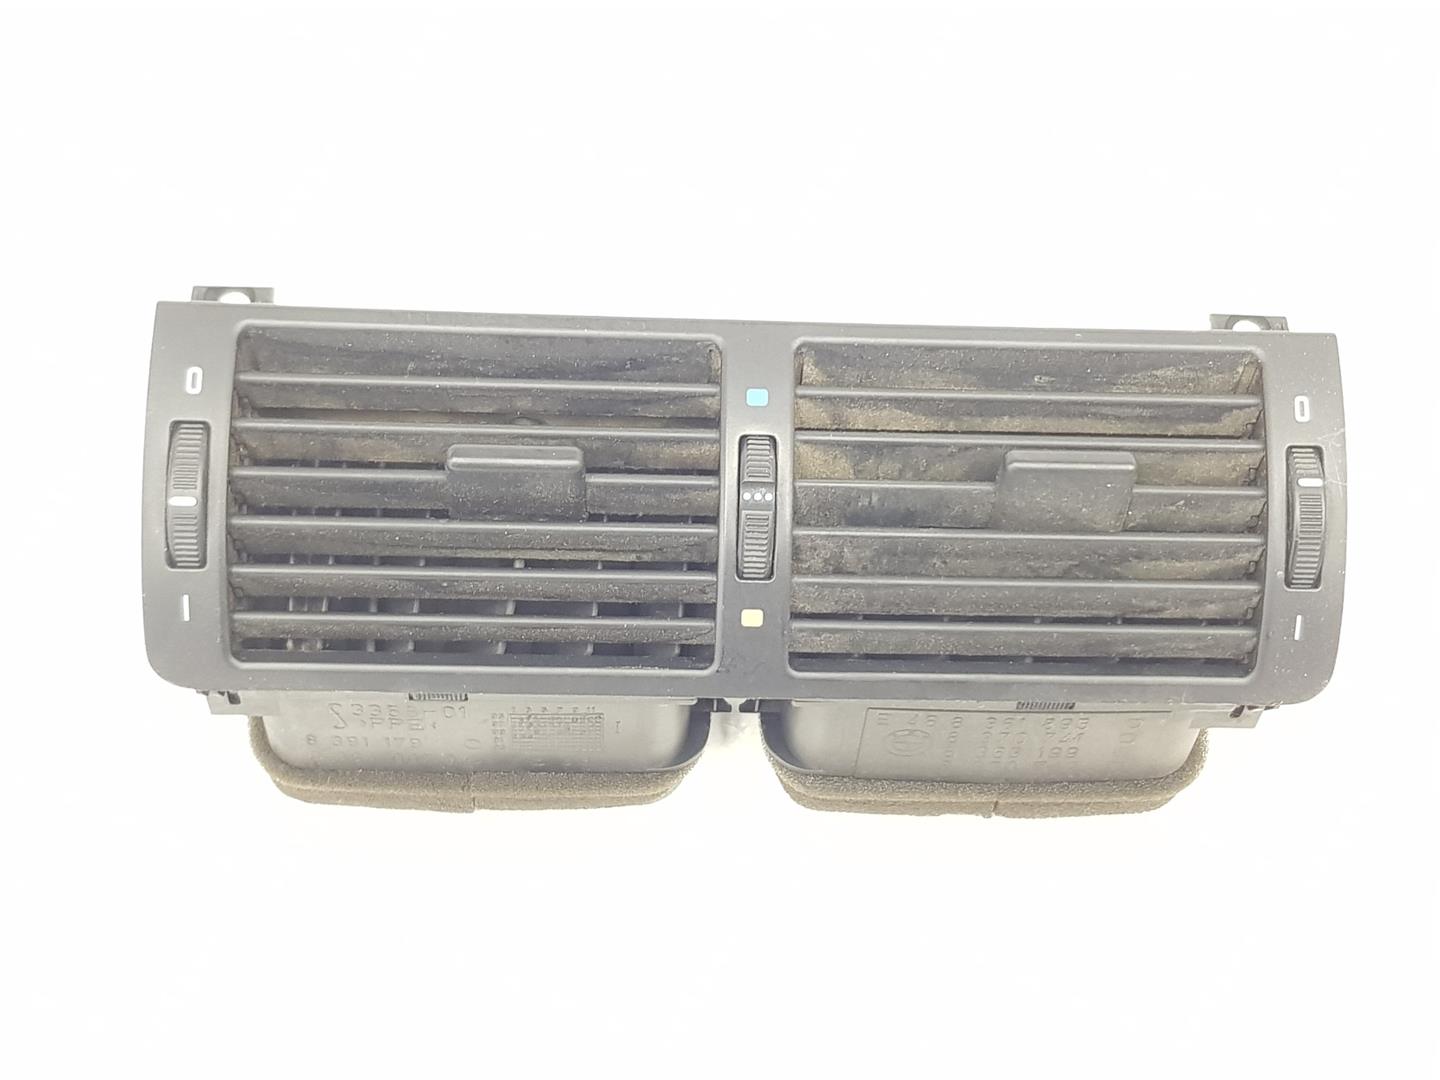 BMW 3 Series E46 (1997-2006) Other Interior Parts 64228363199, 64228363199 24235902